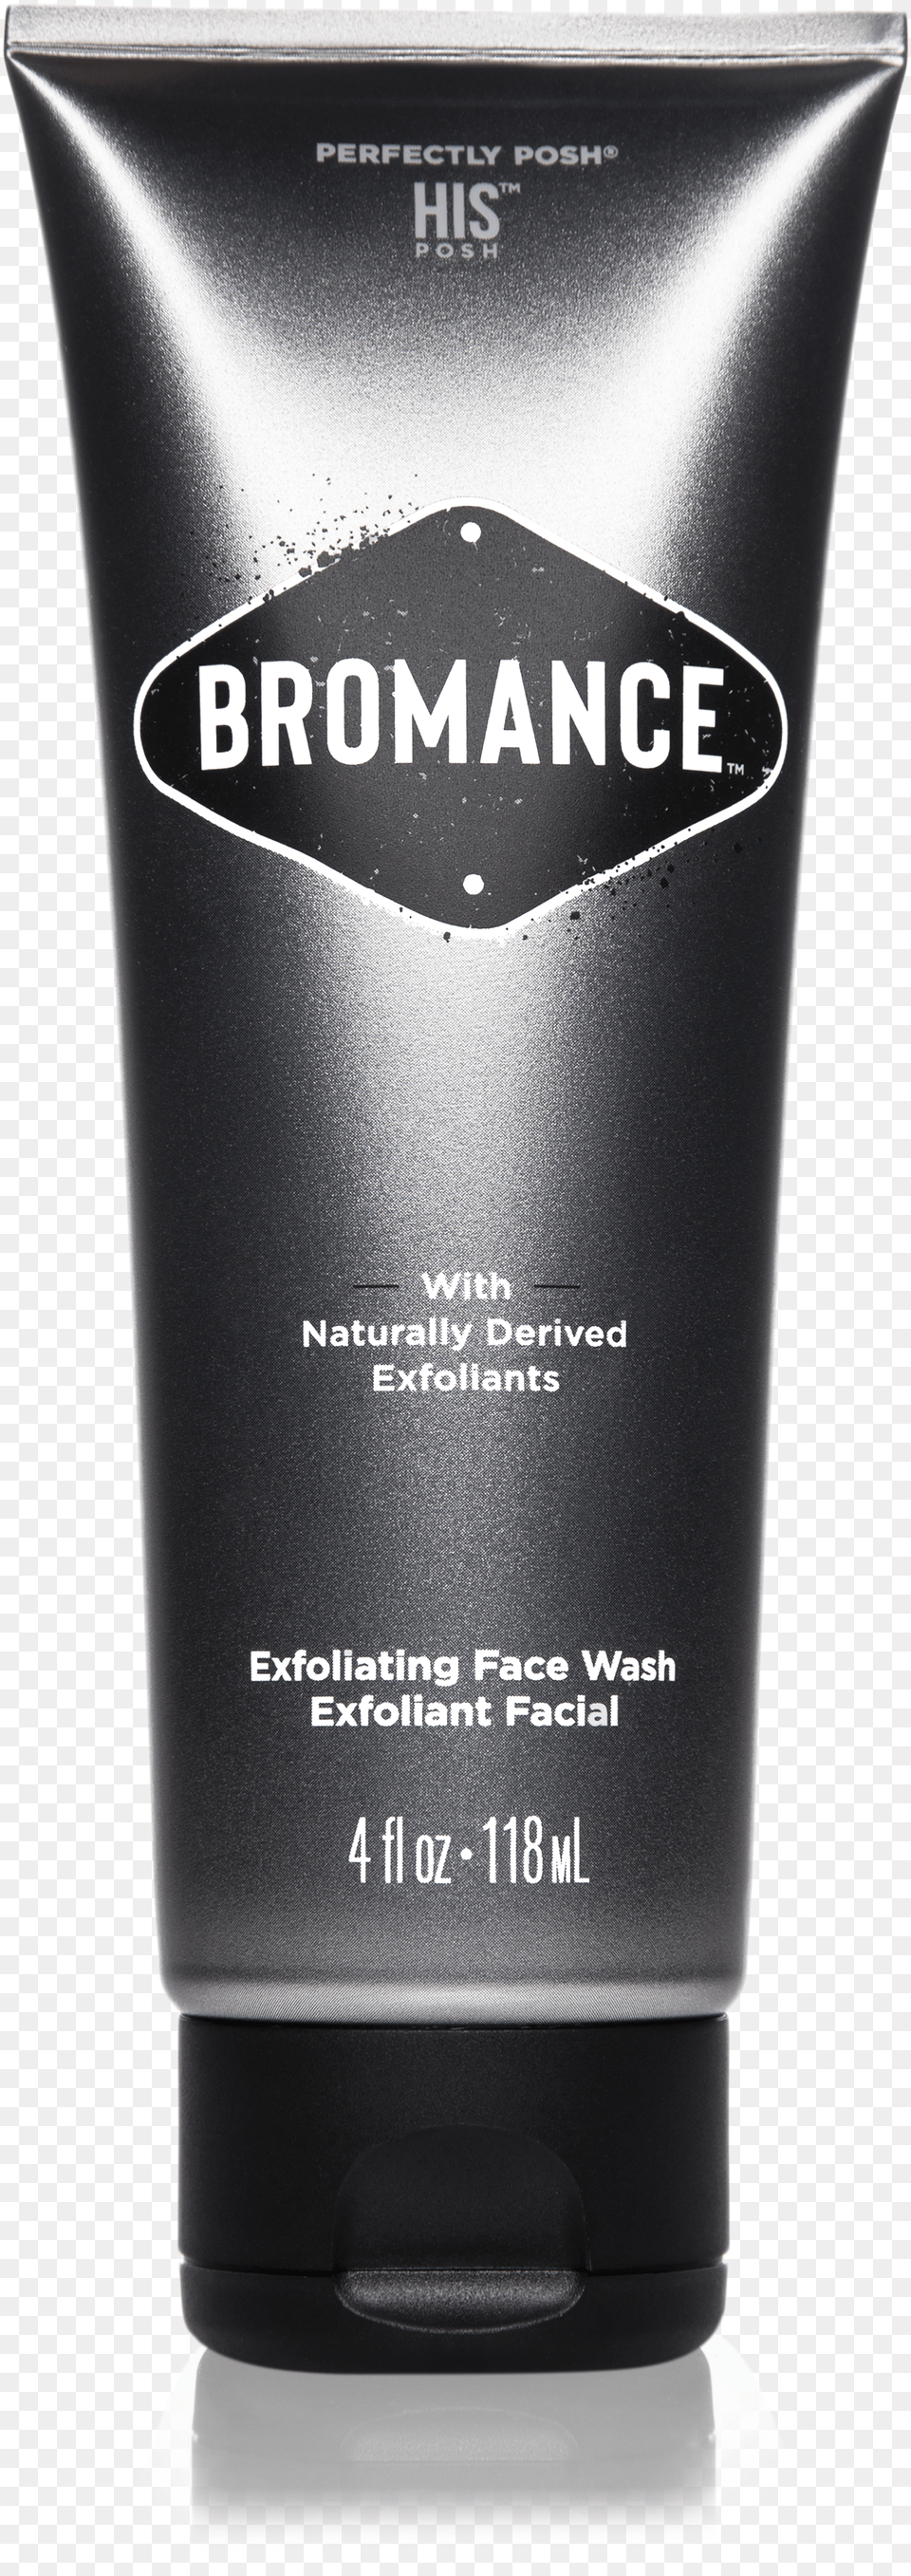 Perfectly Posh Bromance Face Wash Skin Care Png Image